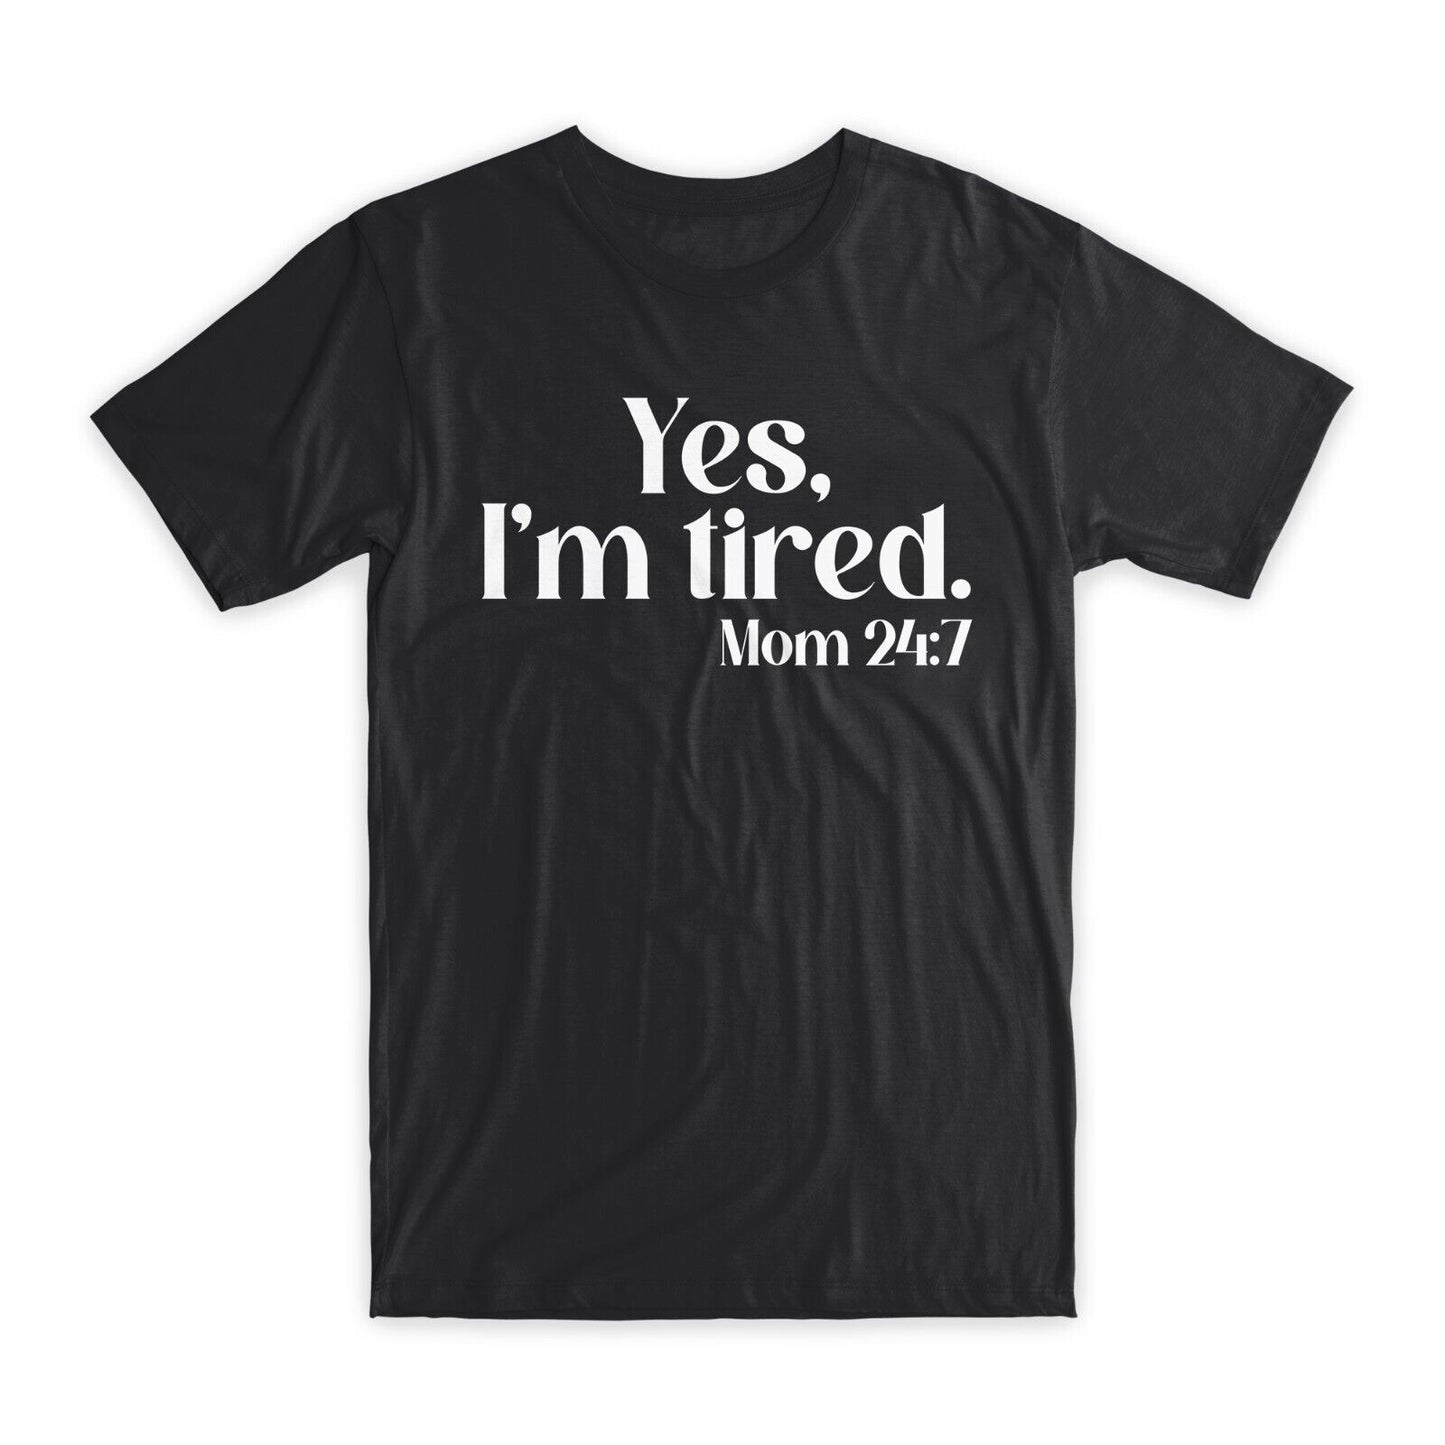 Yes I'm Tired T-Shirt Premium Soft Cotton Crew Neck Funny Tees Novelty Gifts NEW